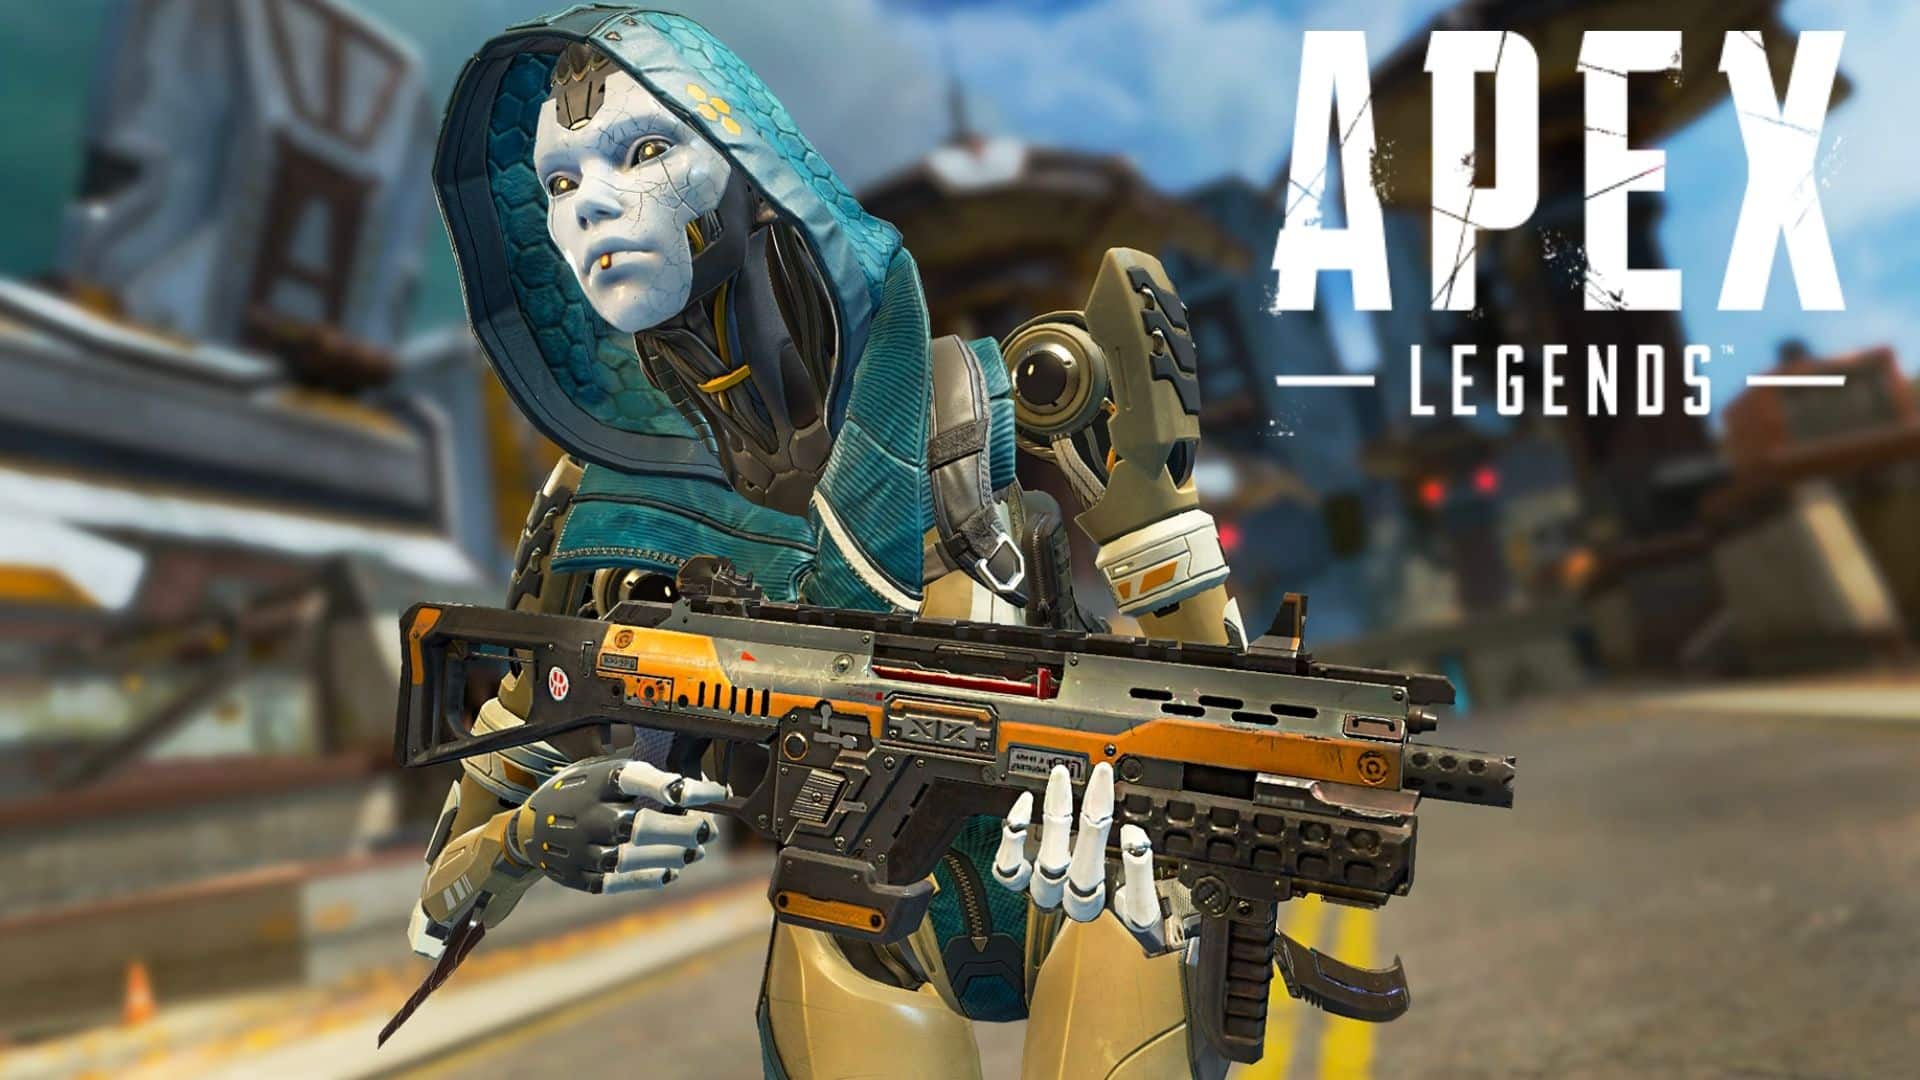 Ash in Apex Legends running with CAR SMG in hands